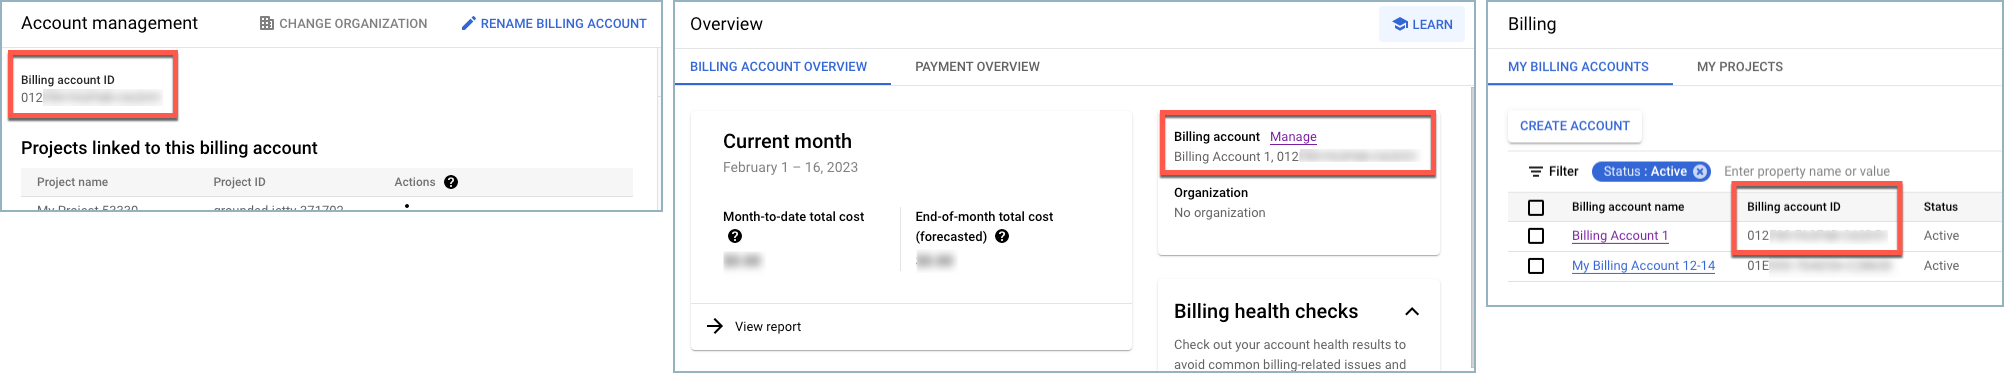 screenshot of 3 pages in GCP where the billing account ID can be located.